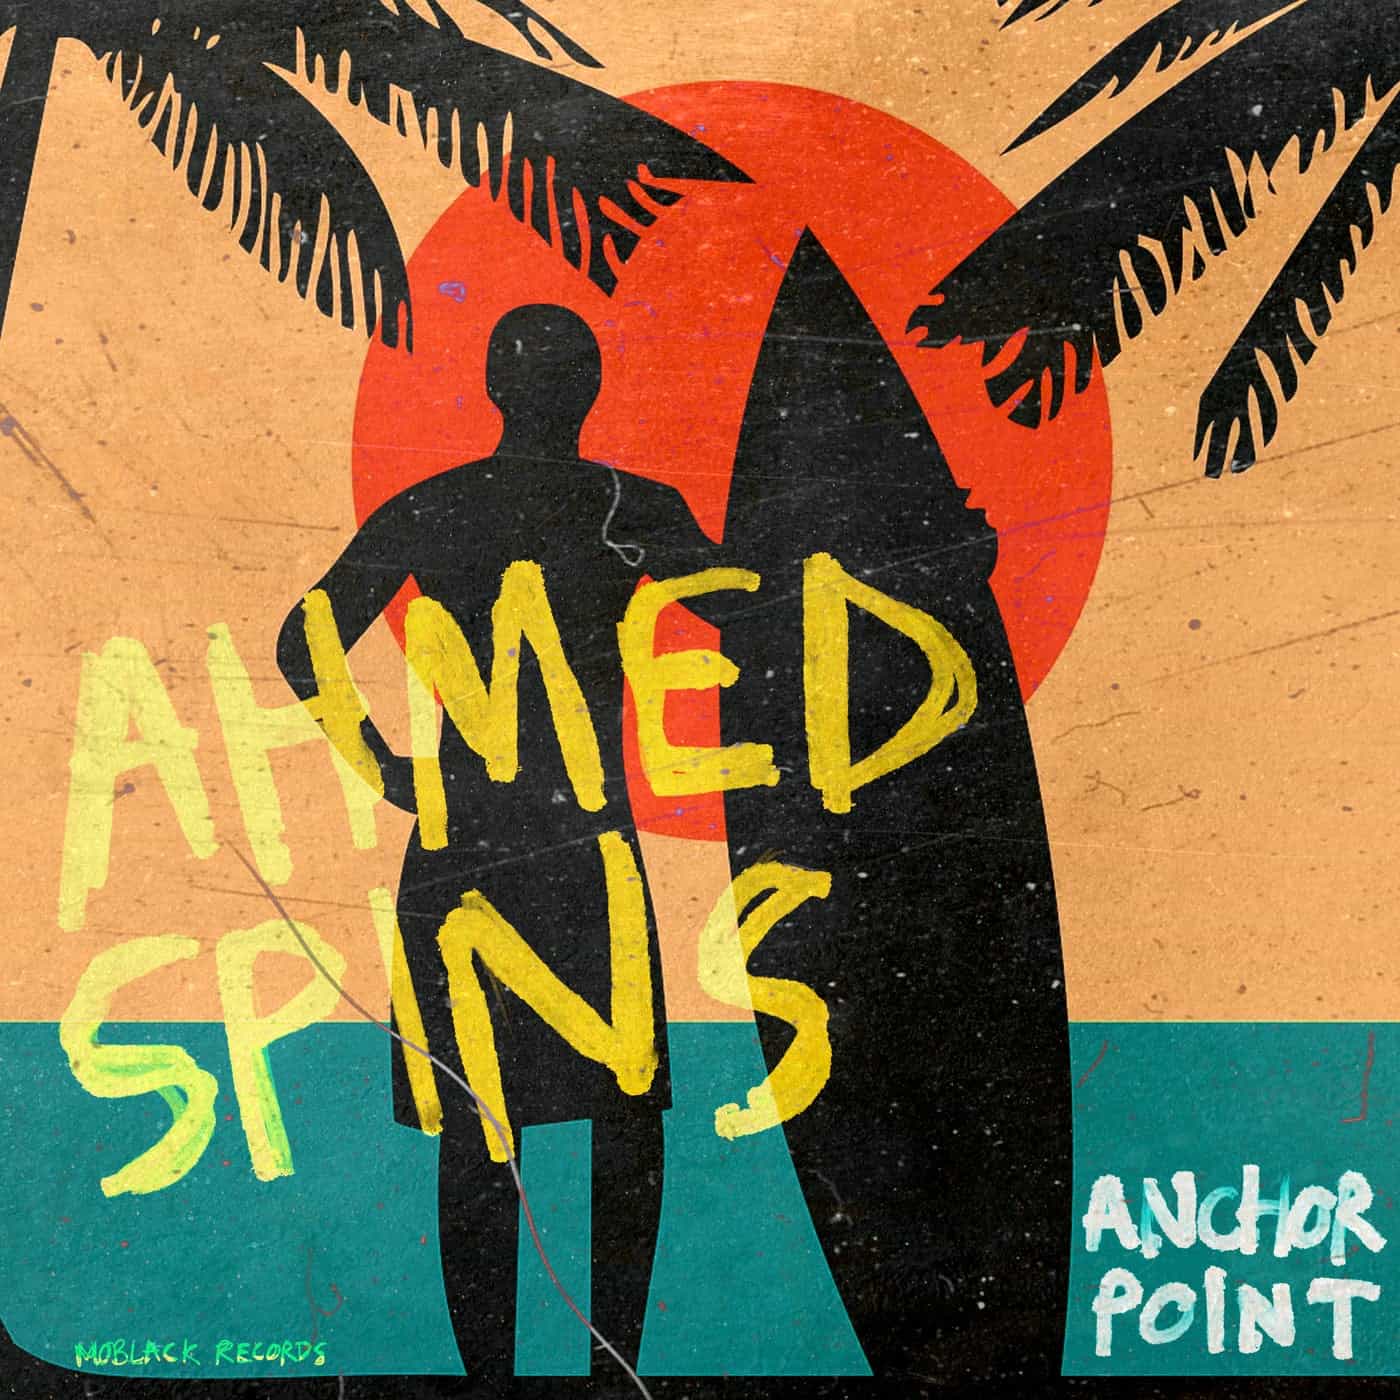 Download Stevo Atambire, Ahmed Spins, Lizwi - Anchor Point EP